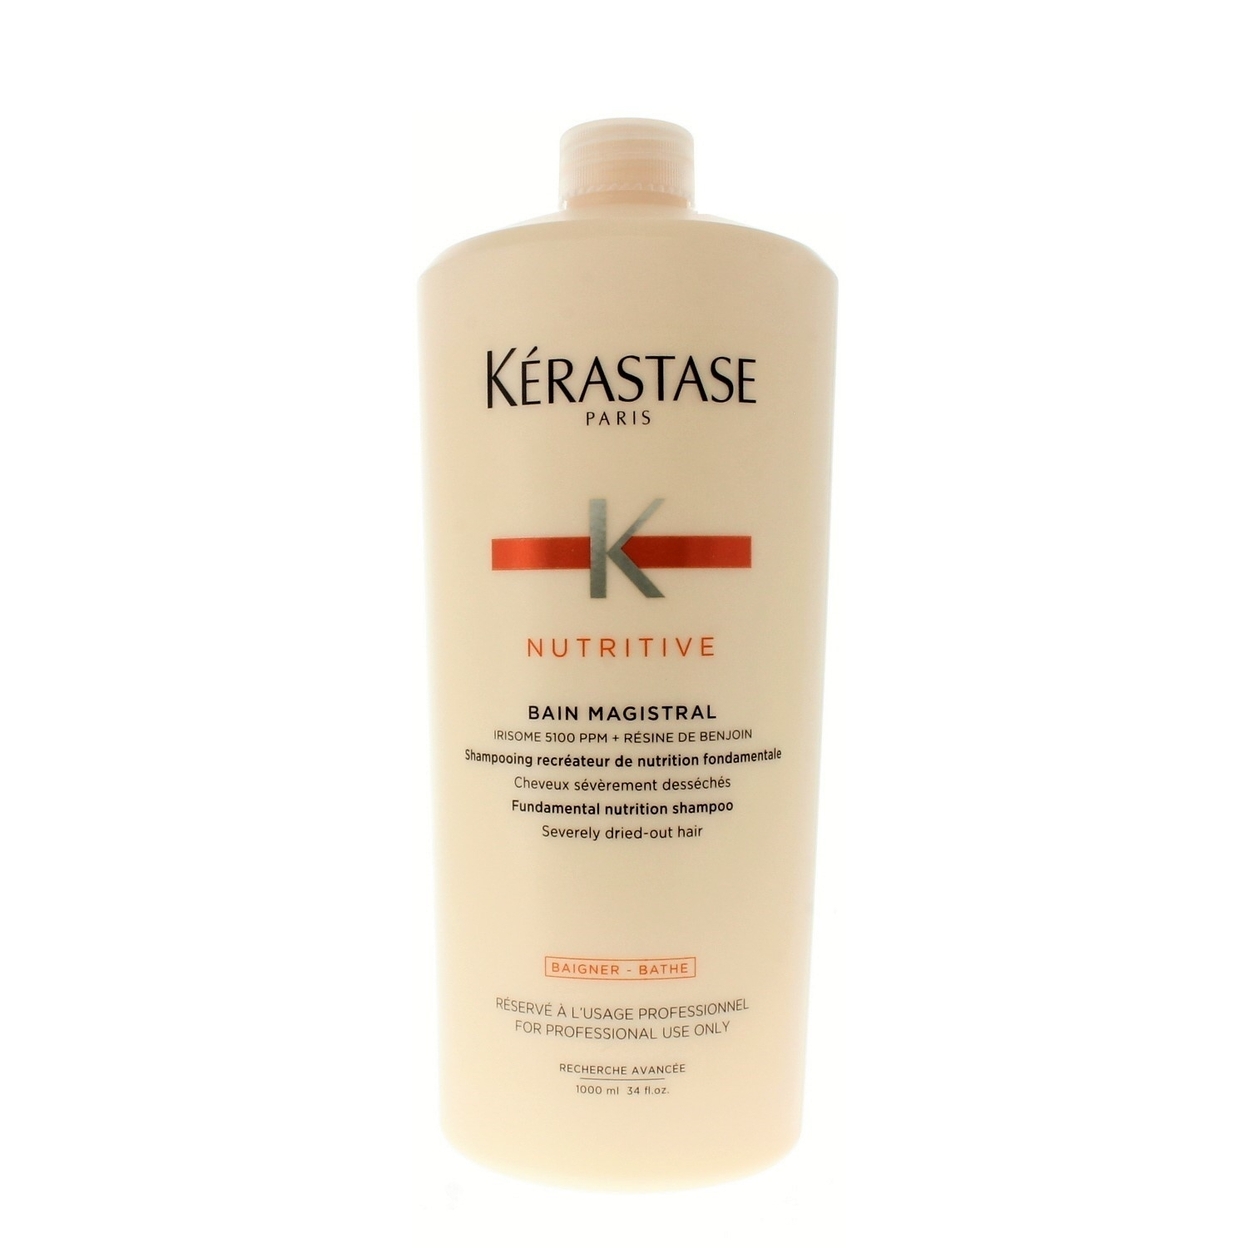 Kerastase Nutritive Bain Magistral Shampoo For Severely Dried-Out Hair 1000ml/34oz